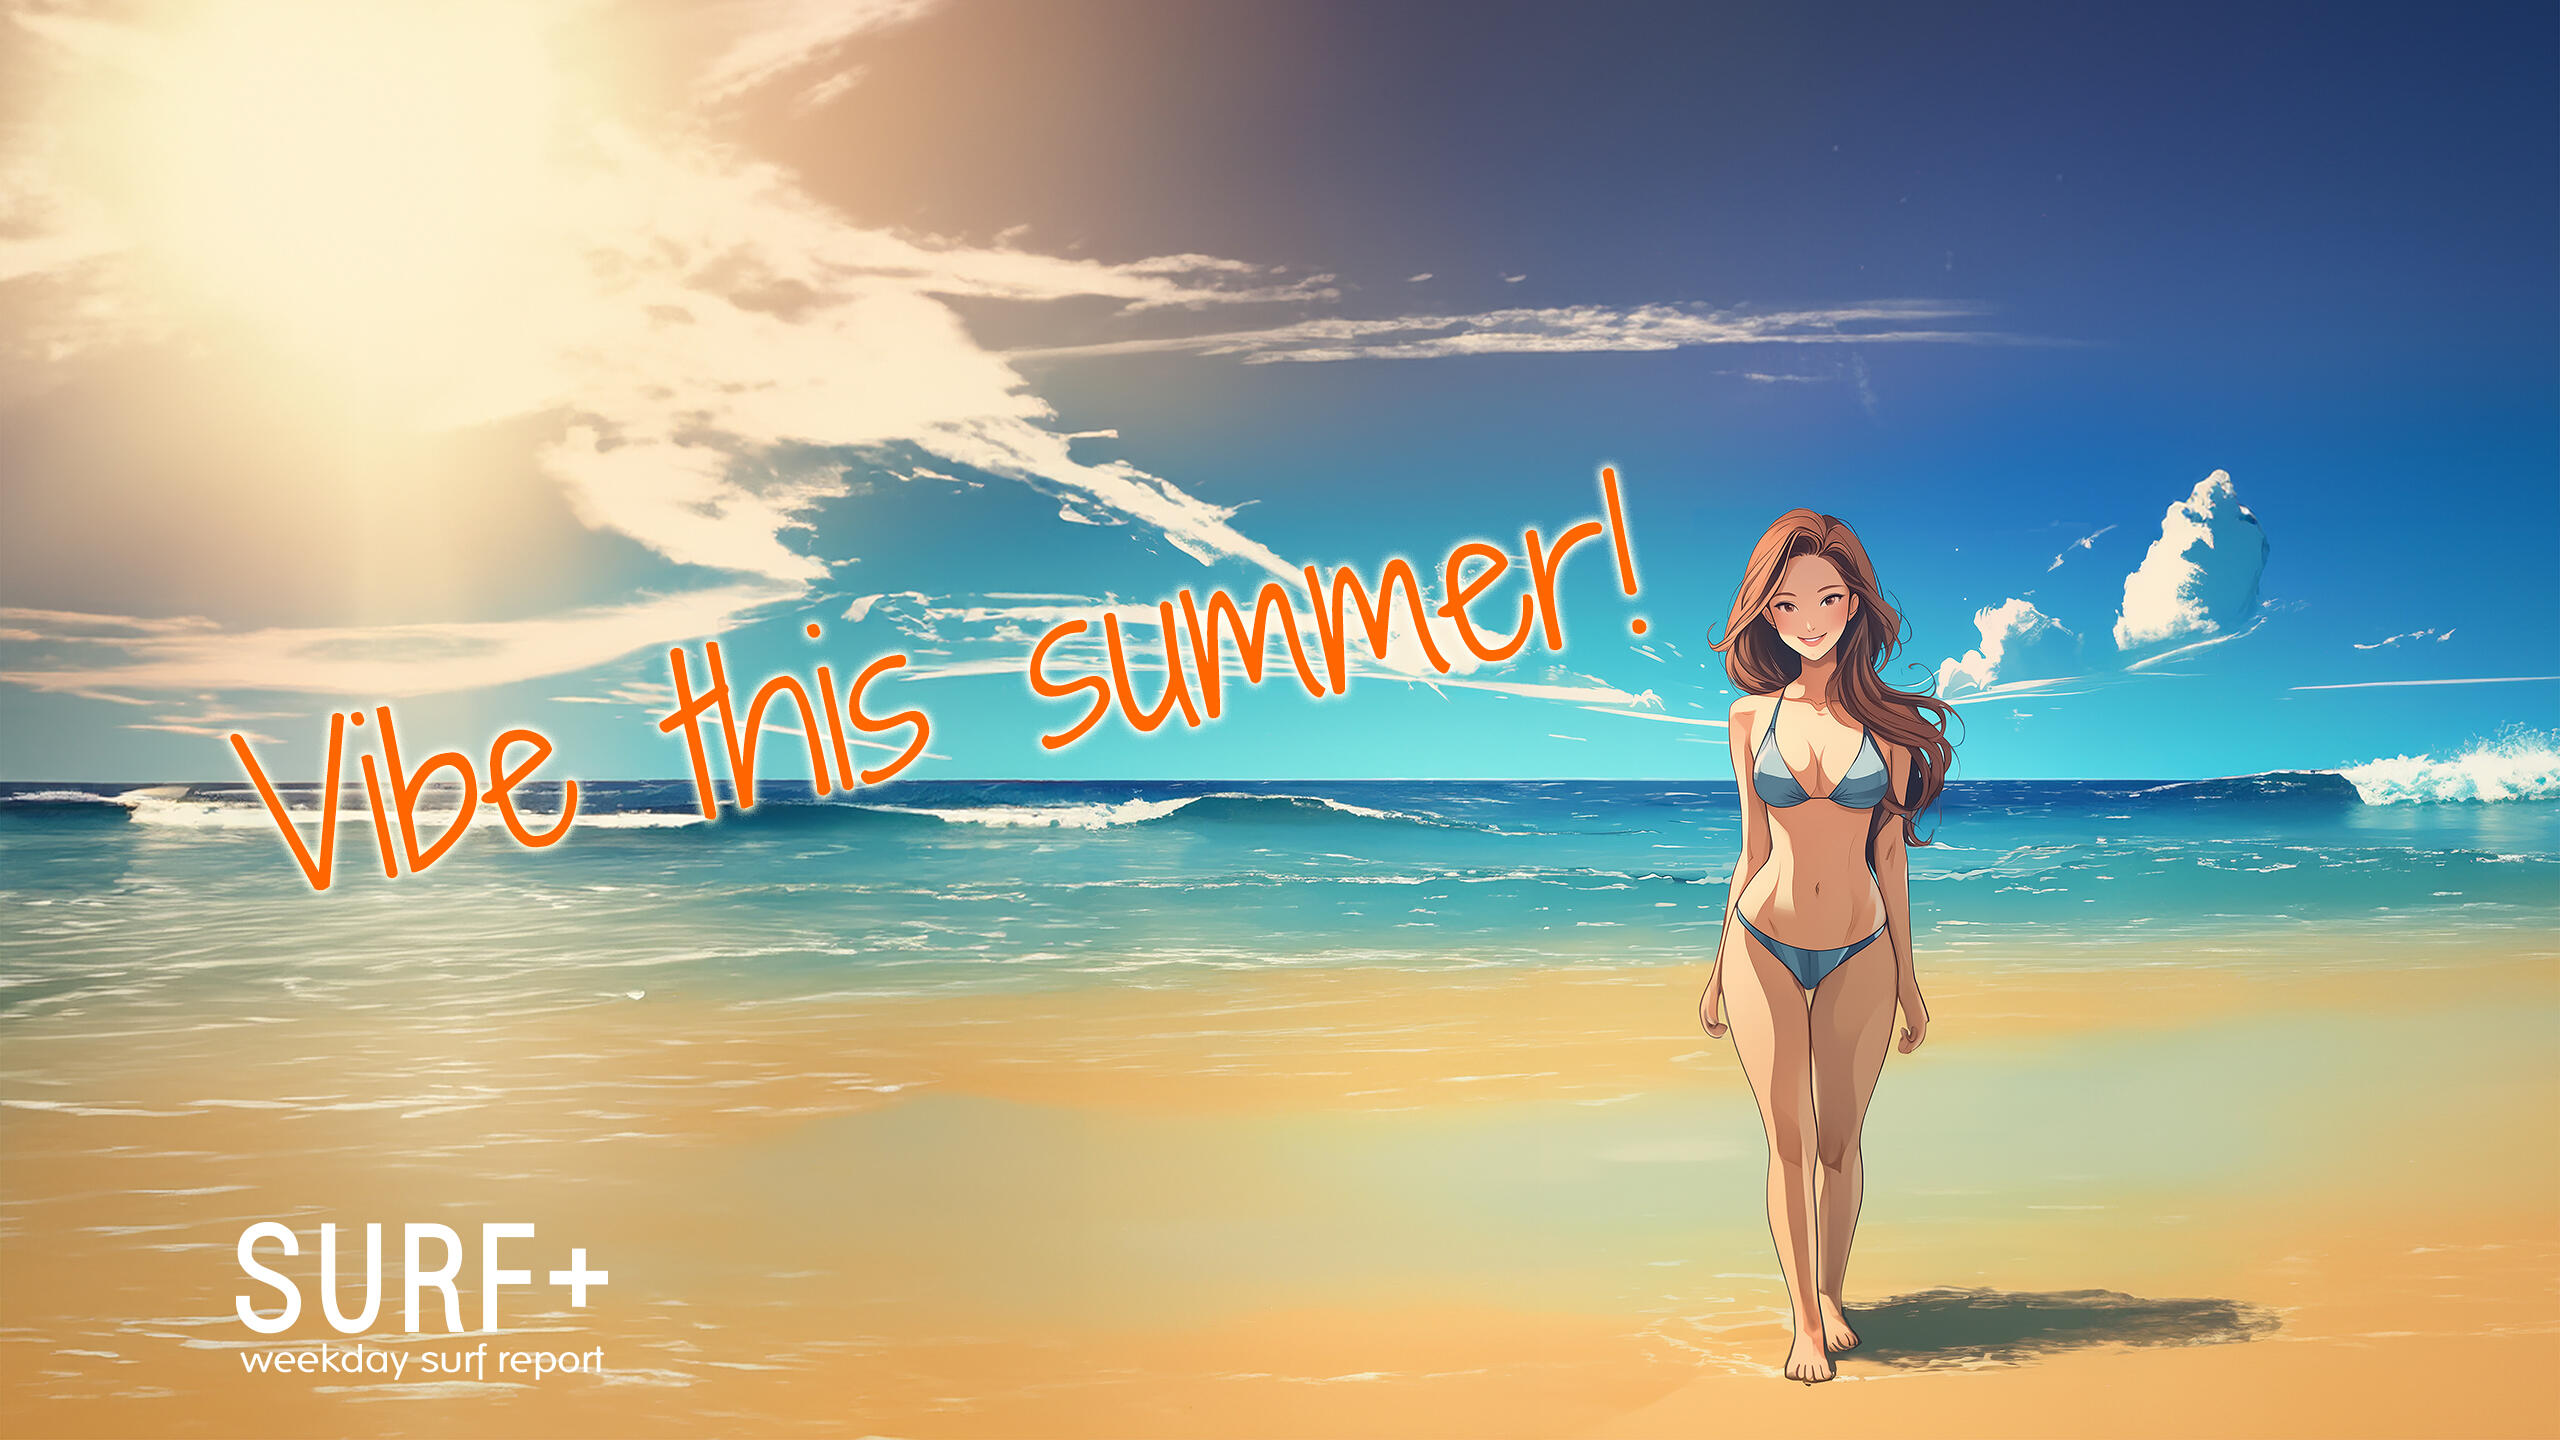 Vive this summer!